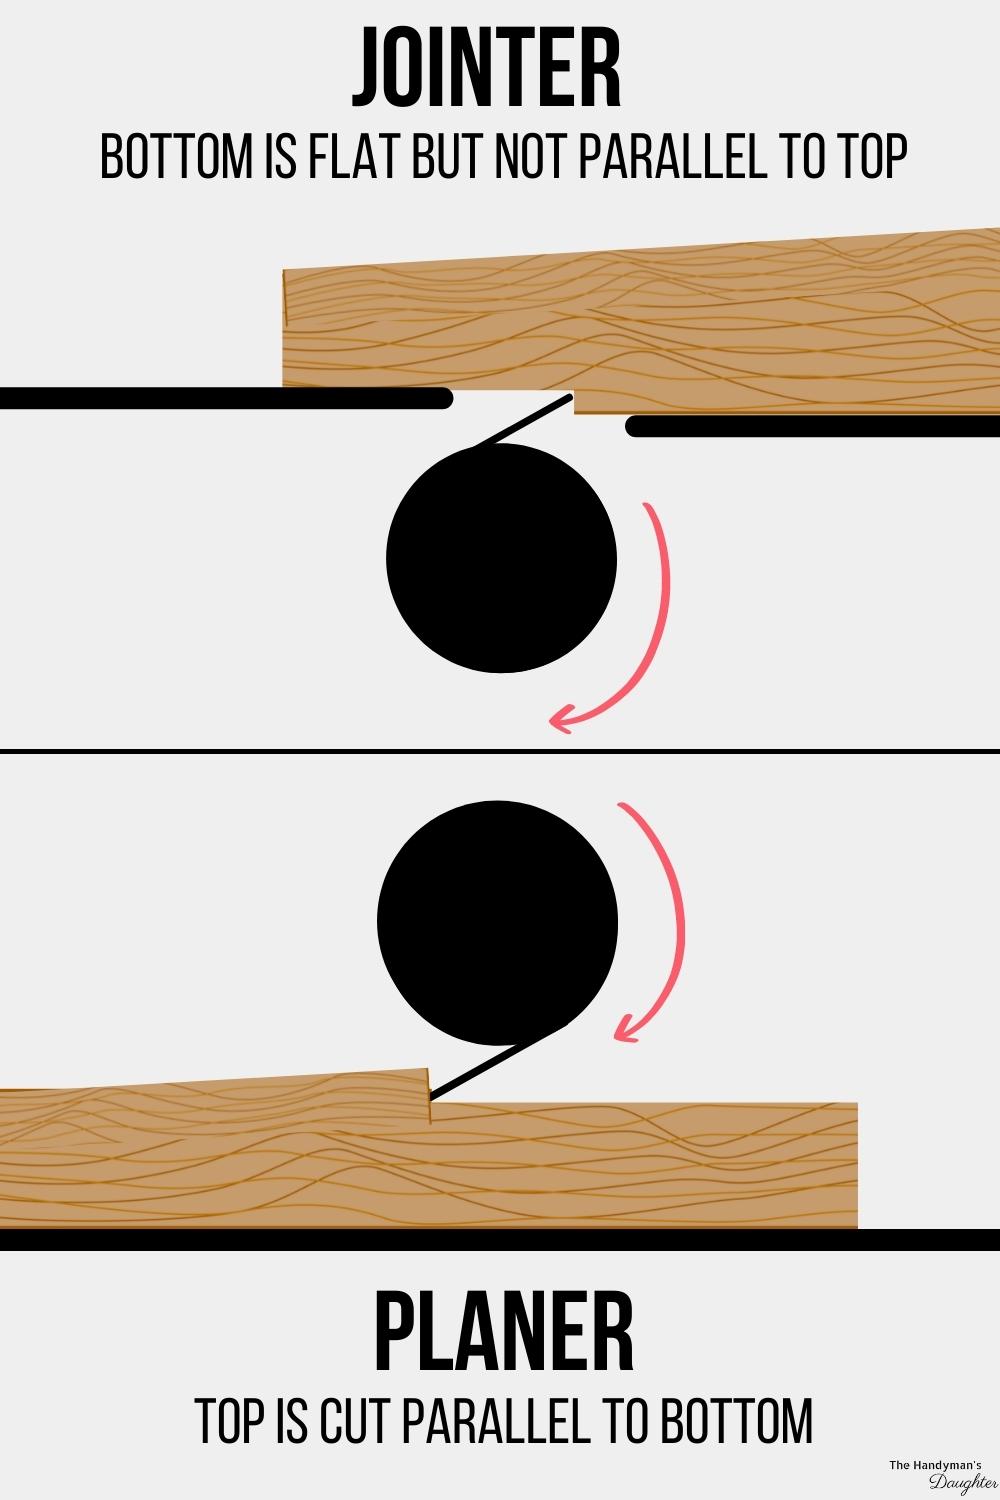 jointer vs planer illustration showing how each tool works to create a flat board with parallel sides